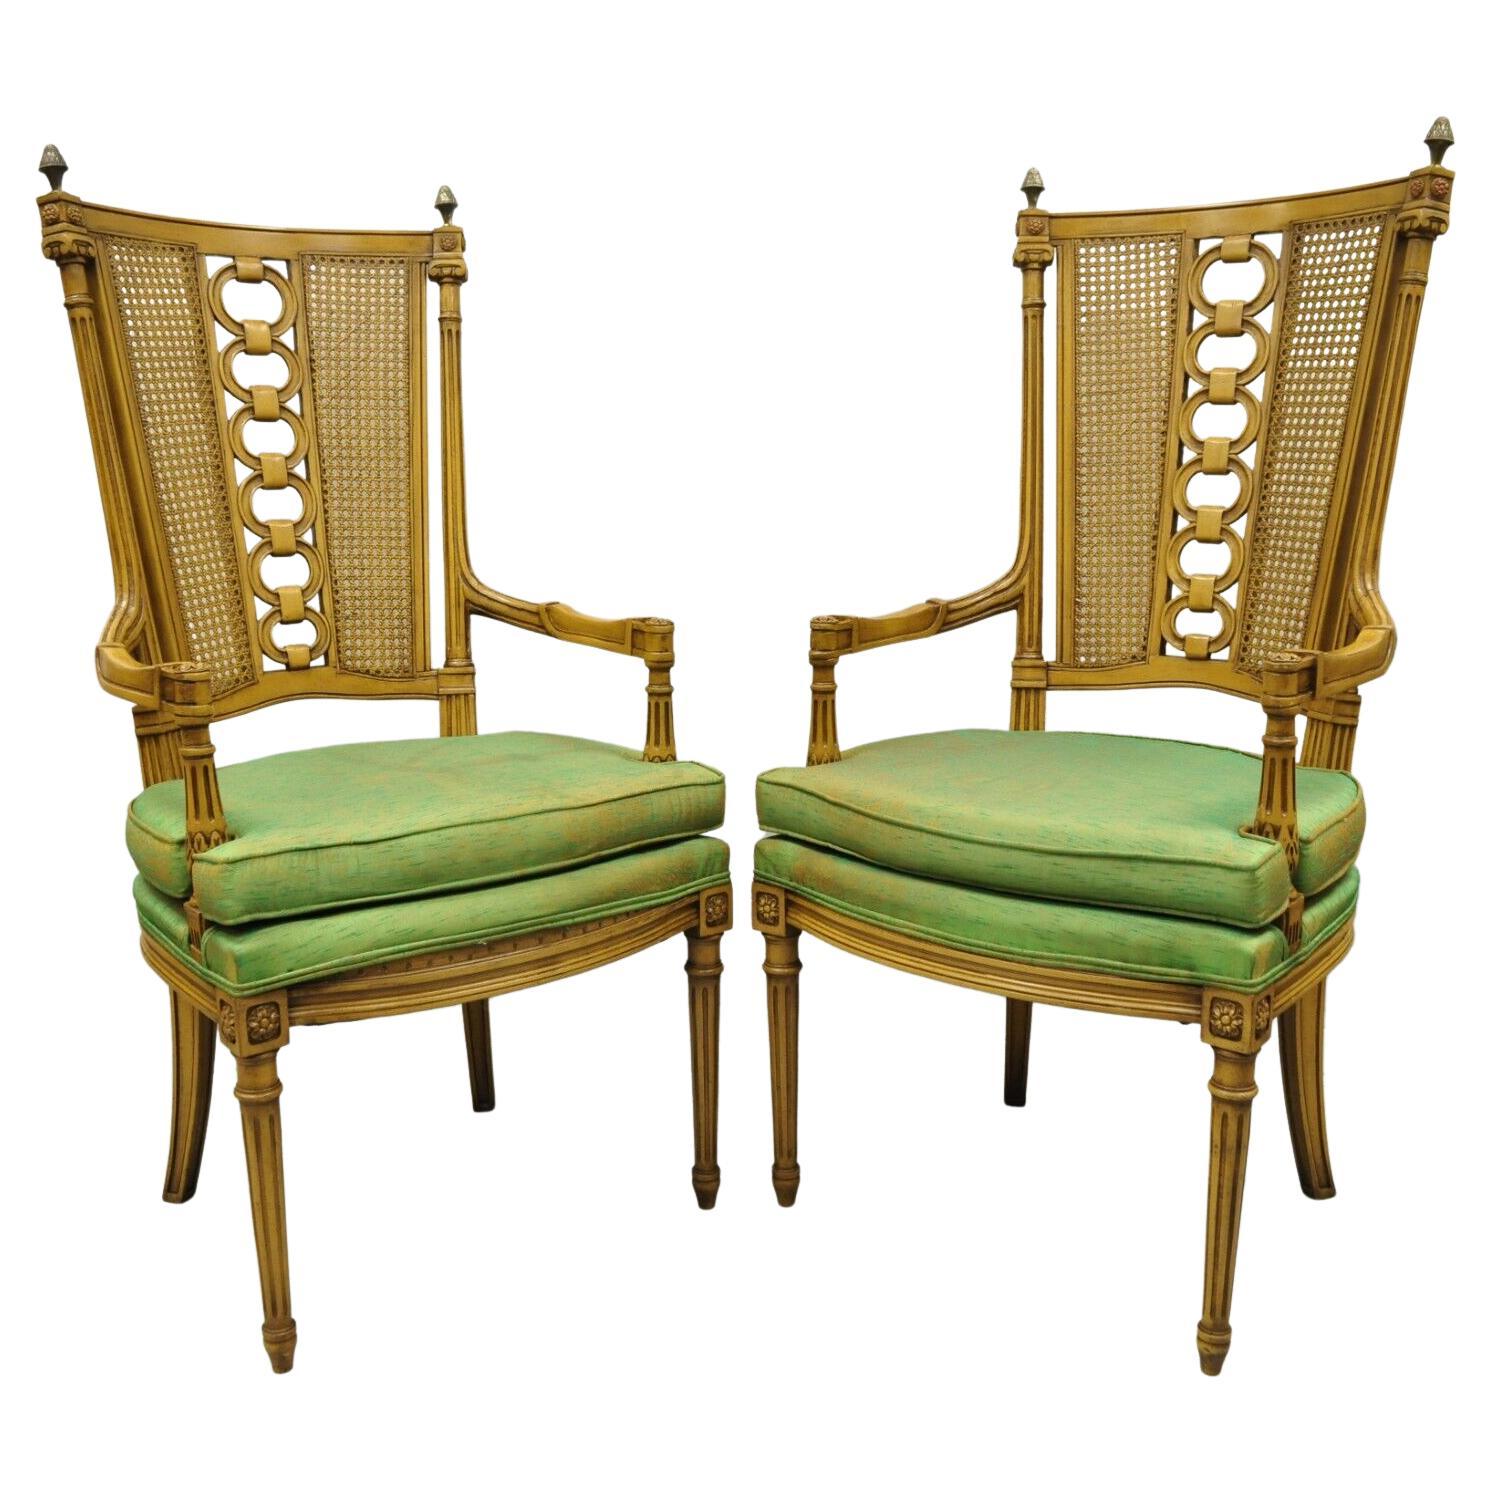 Vintage French Hollywood Regency Tall Cane Back Carved Link Chairs, a Pair